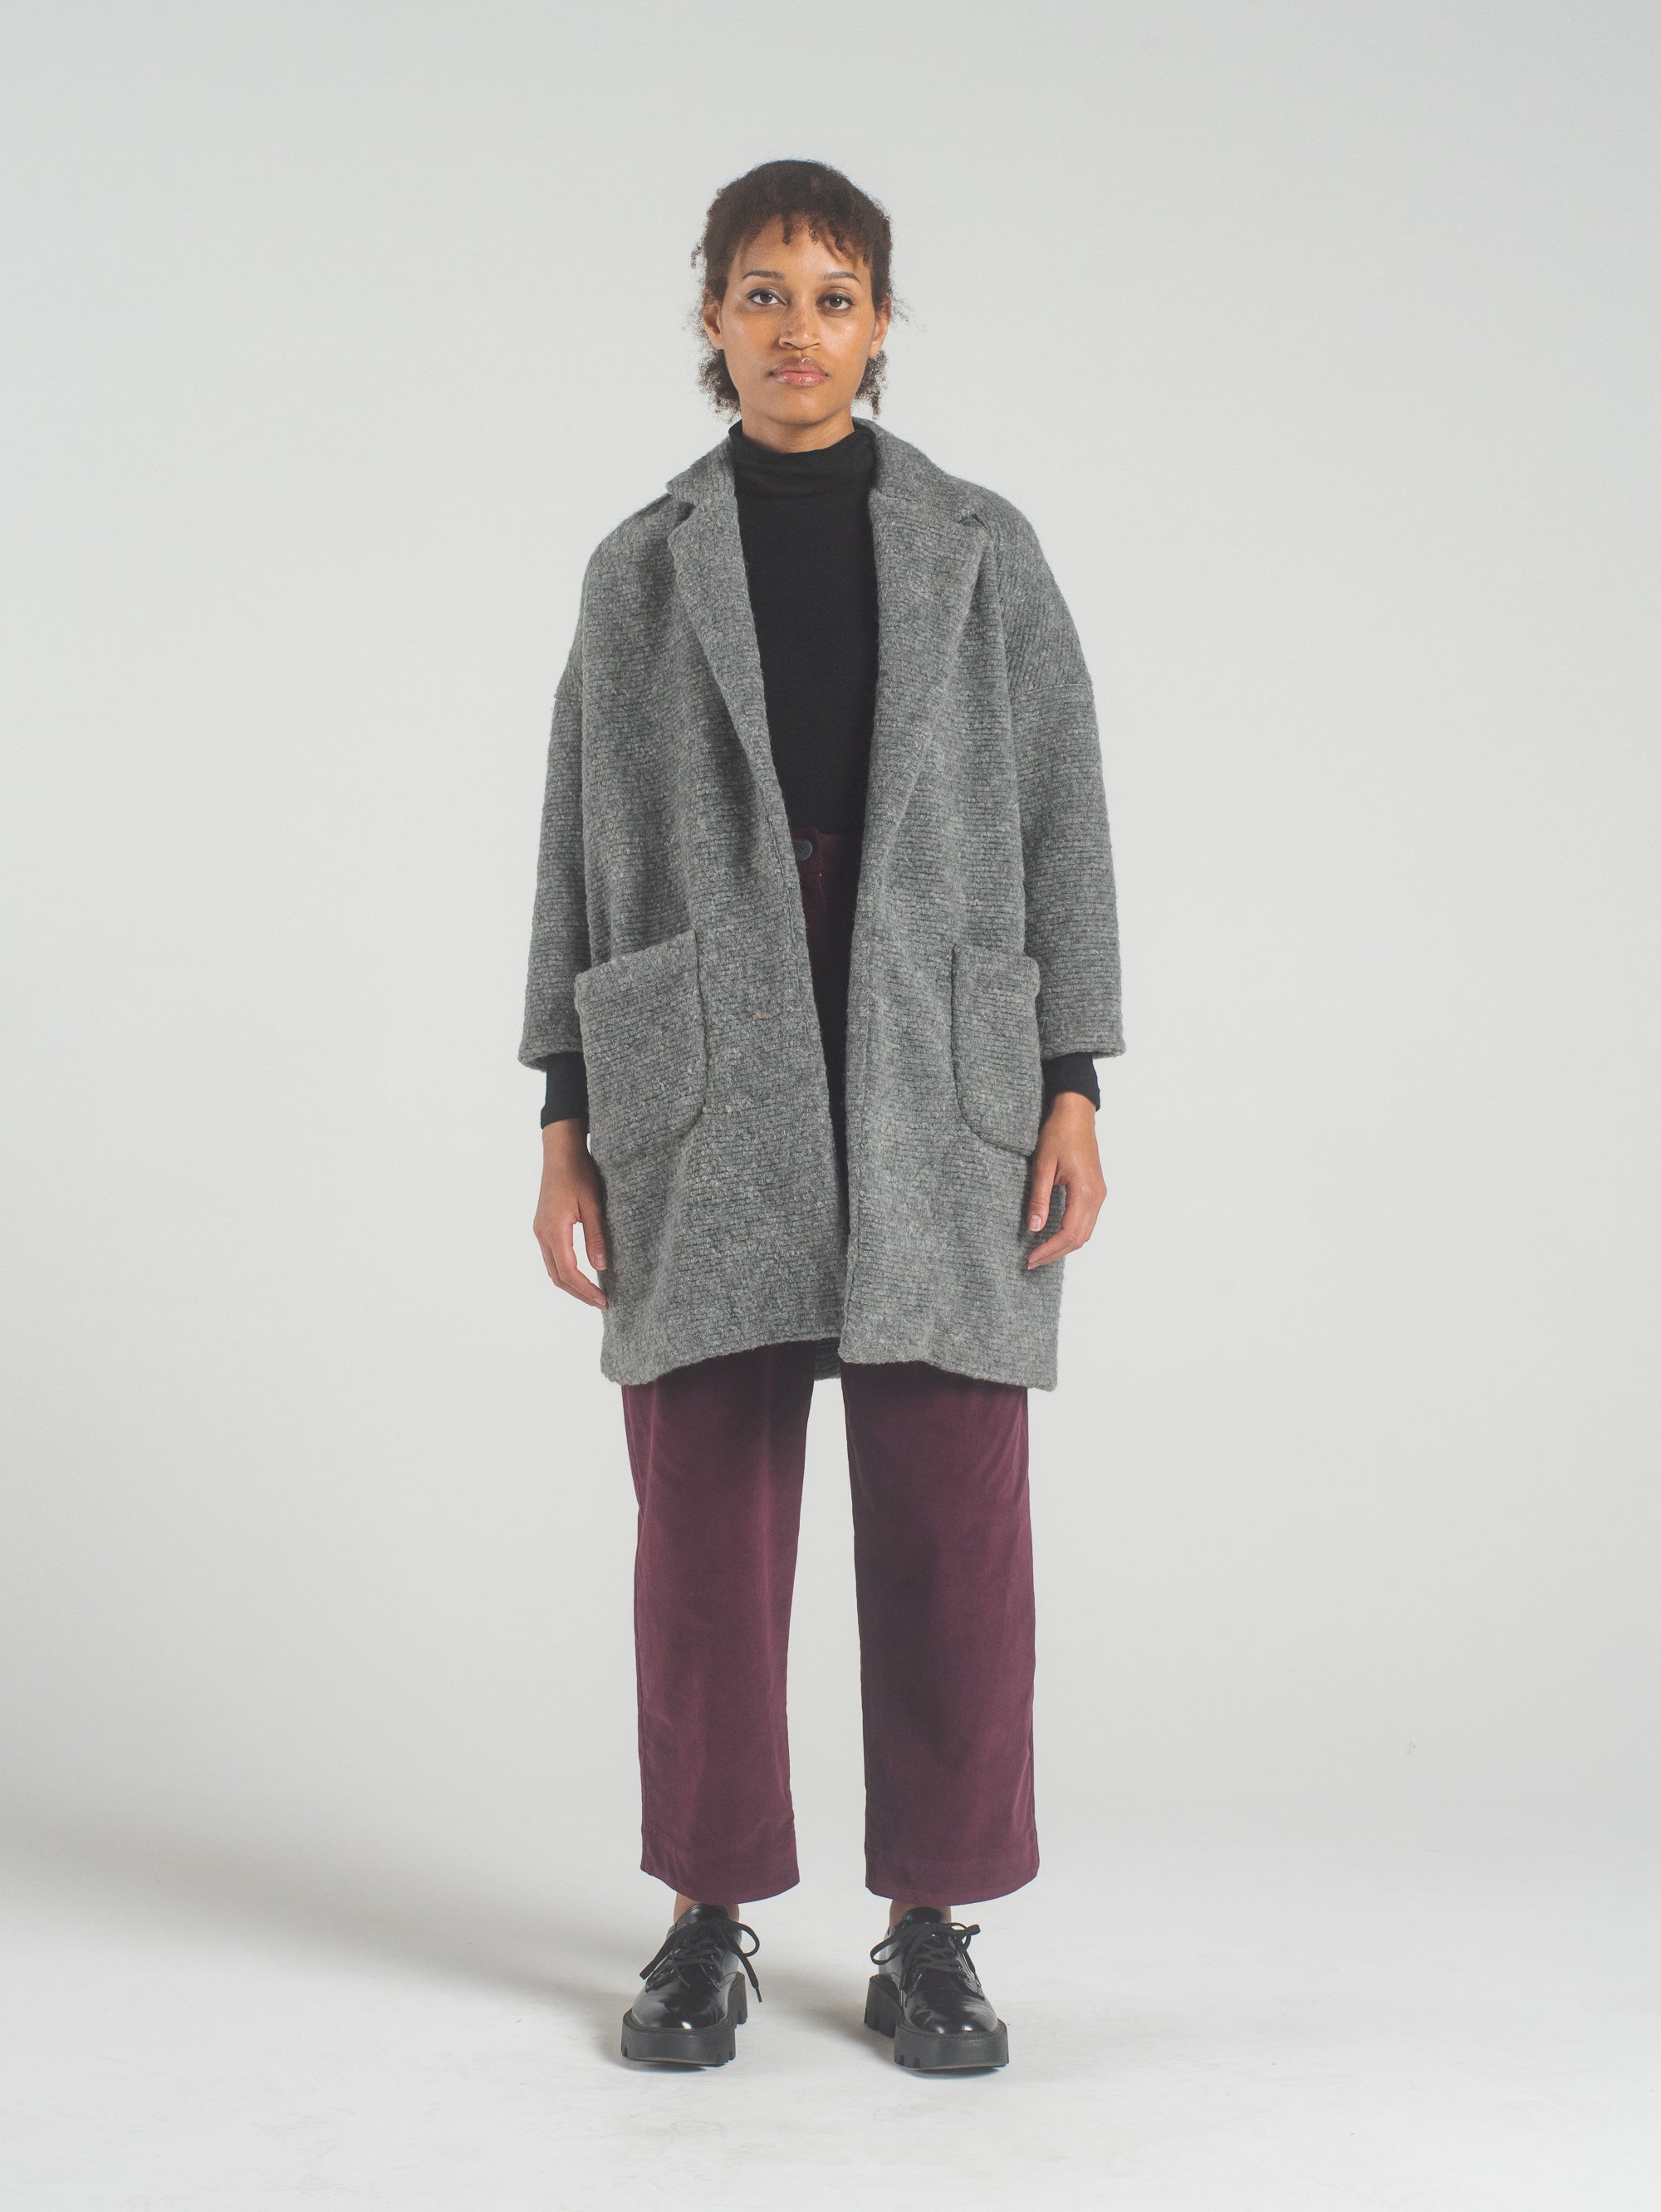 SAMPLE SALE - Anais Jacket in Heather Wool - LARGE